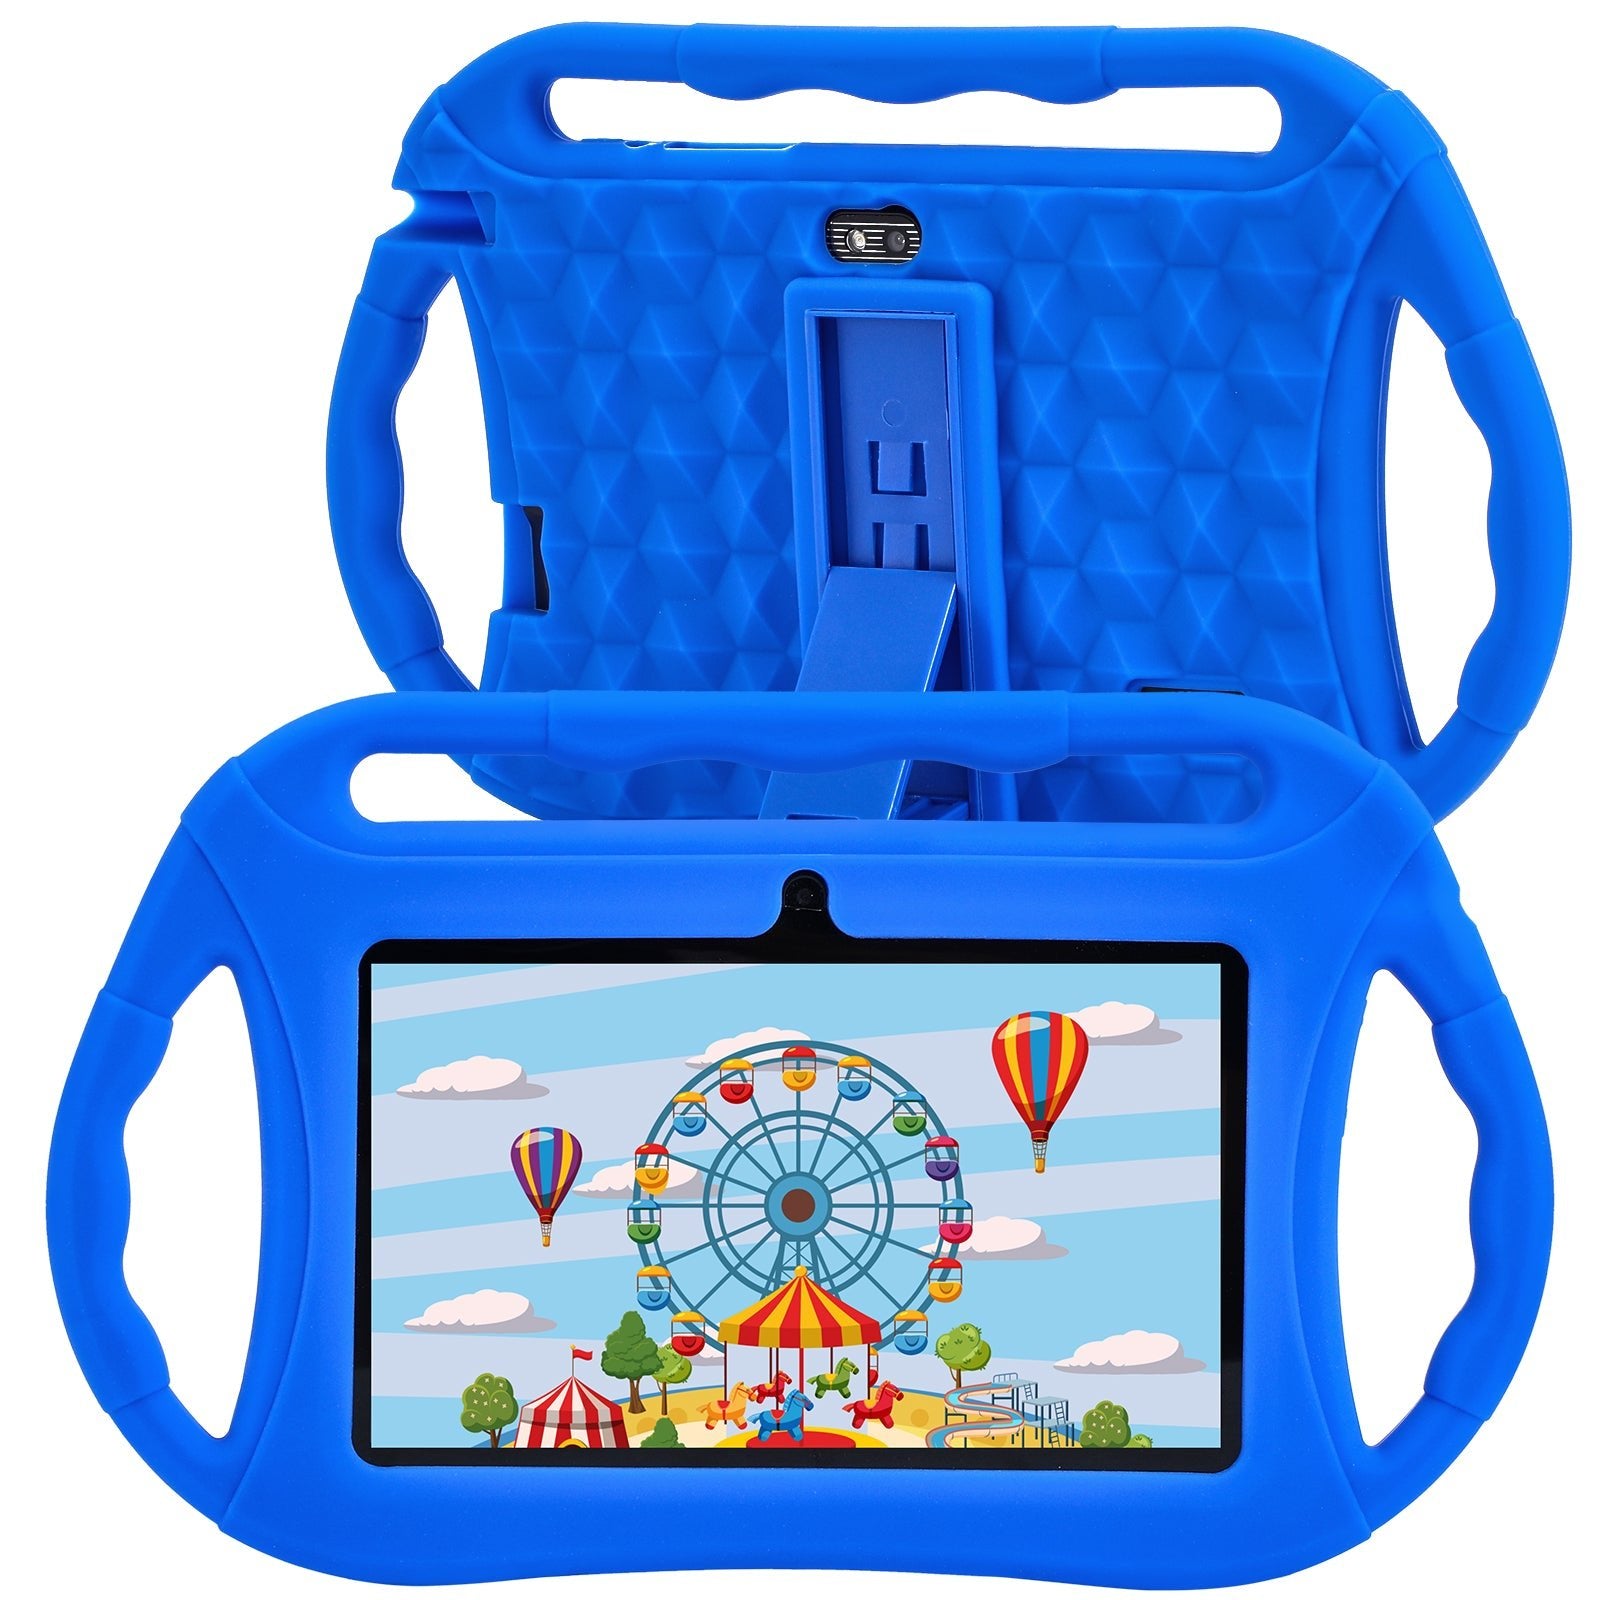 Veidoo Android Toddler Tablet for Kids 7 inch 32GB WiFi Dual Camera Kids Content Parental Control Tablet Pc with Kid-Proof Case | Electrr Inc